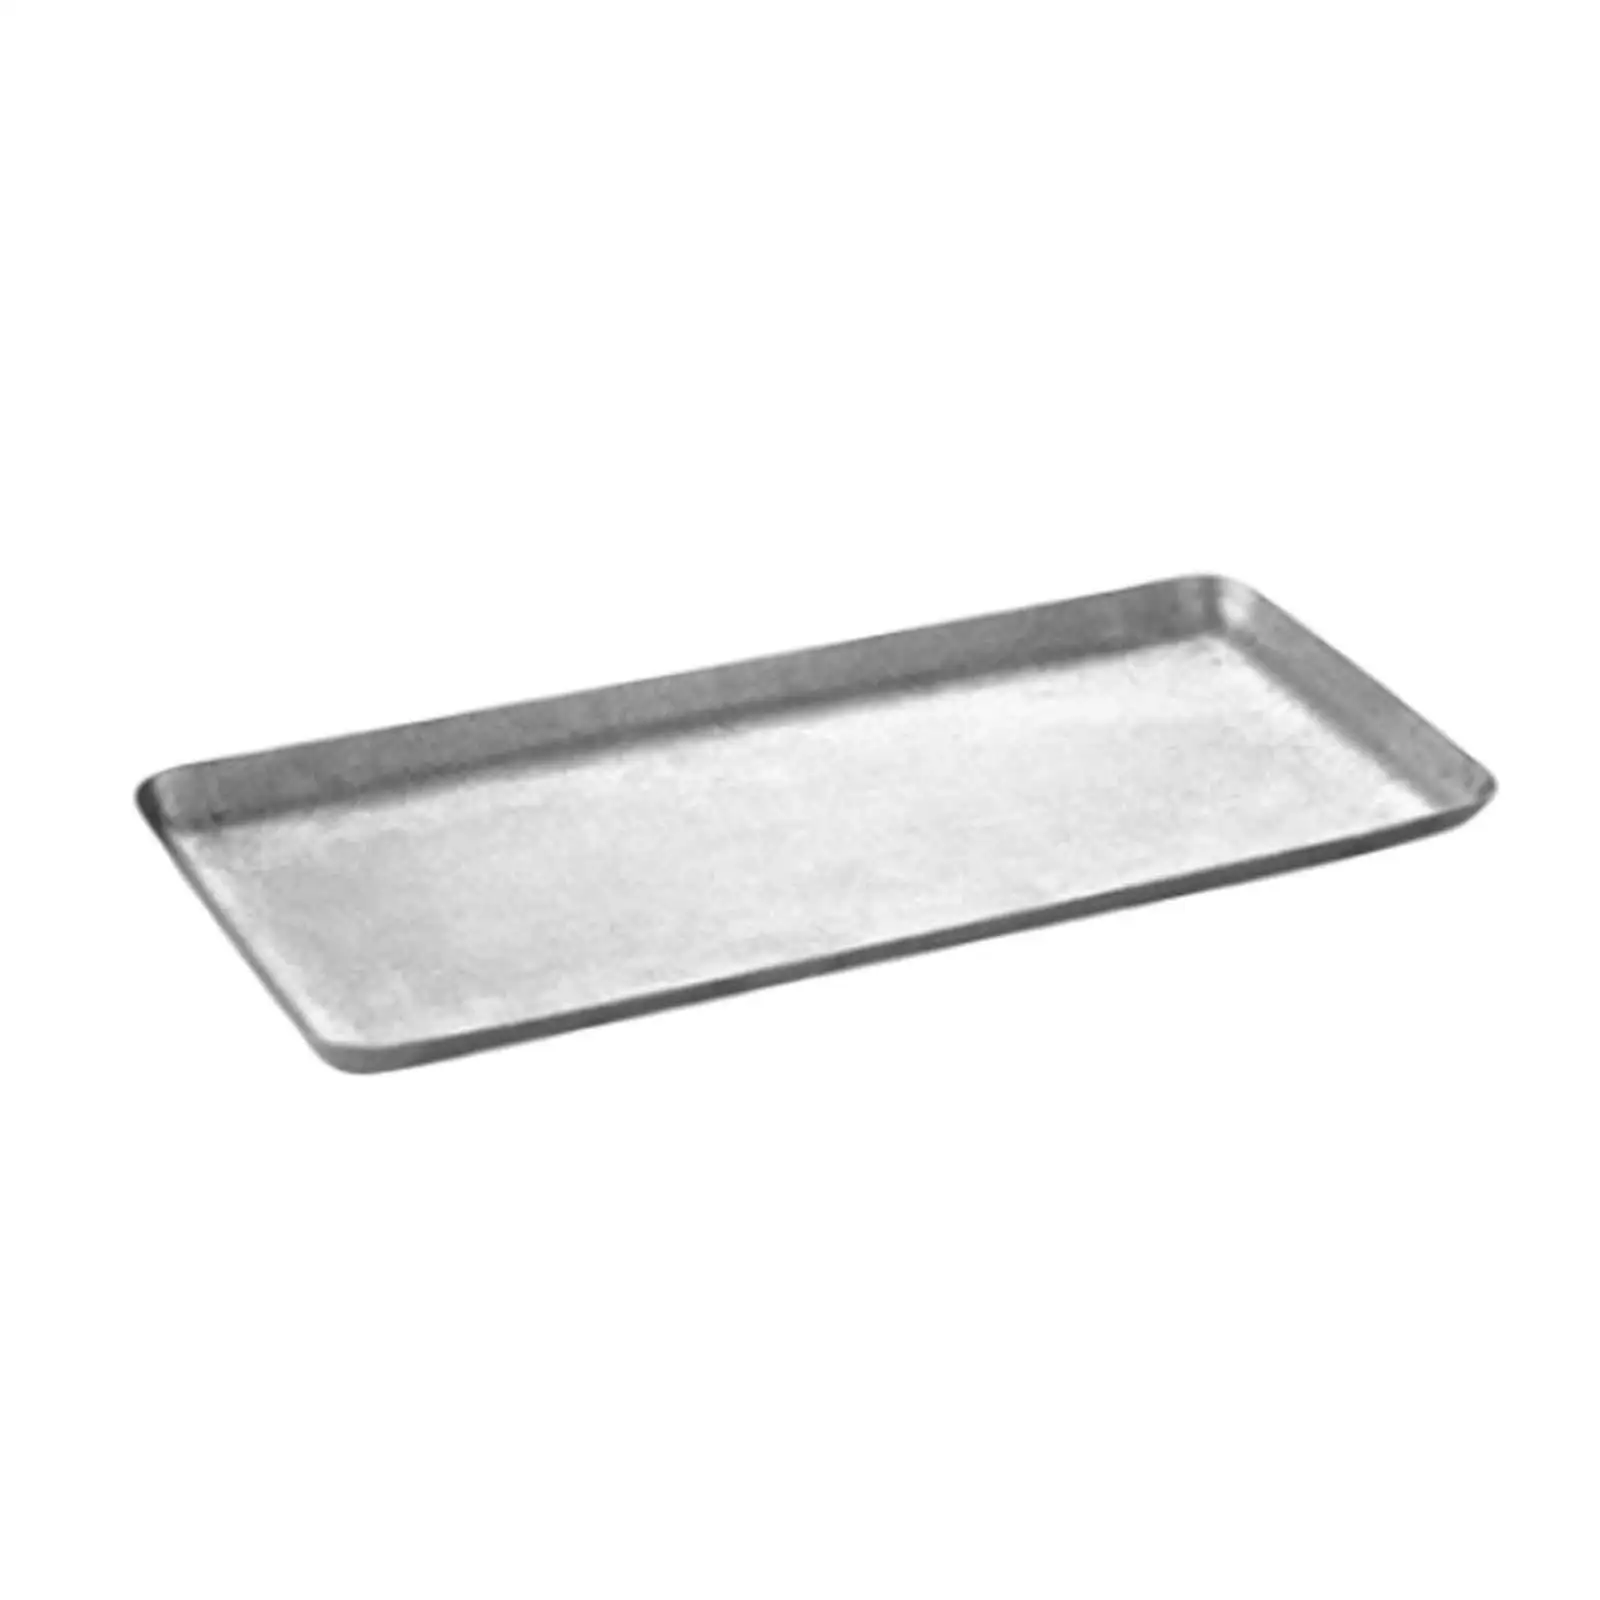 Stainless Steel Serving Tray Storage Organizer Stylish Platter Flat Tray for Farmhouse Party Dining Room Desktop Bedroom